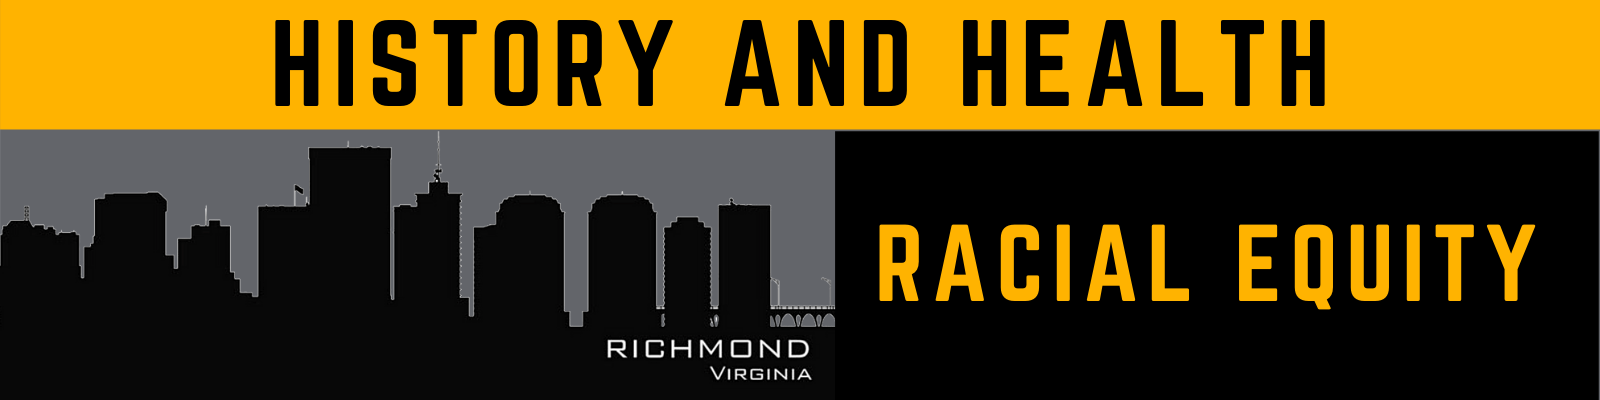 VCU Health Race and Equity video series